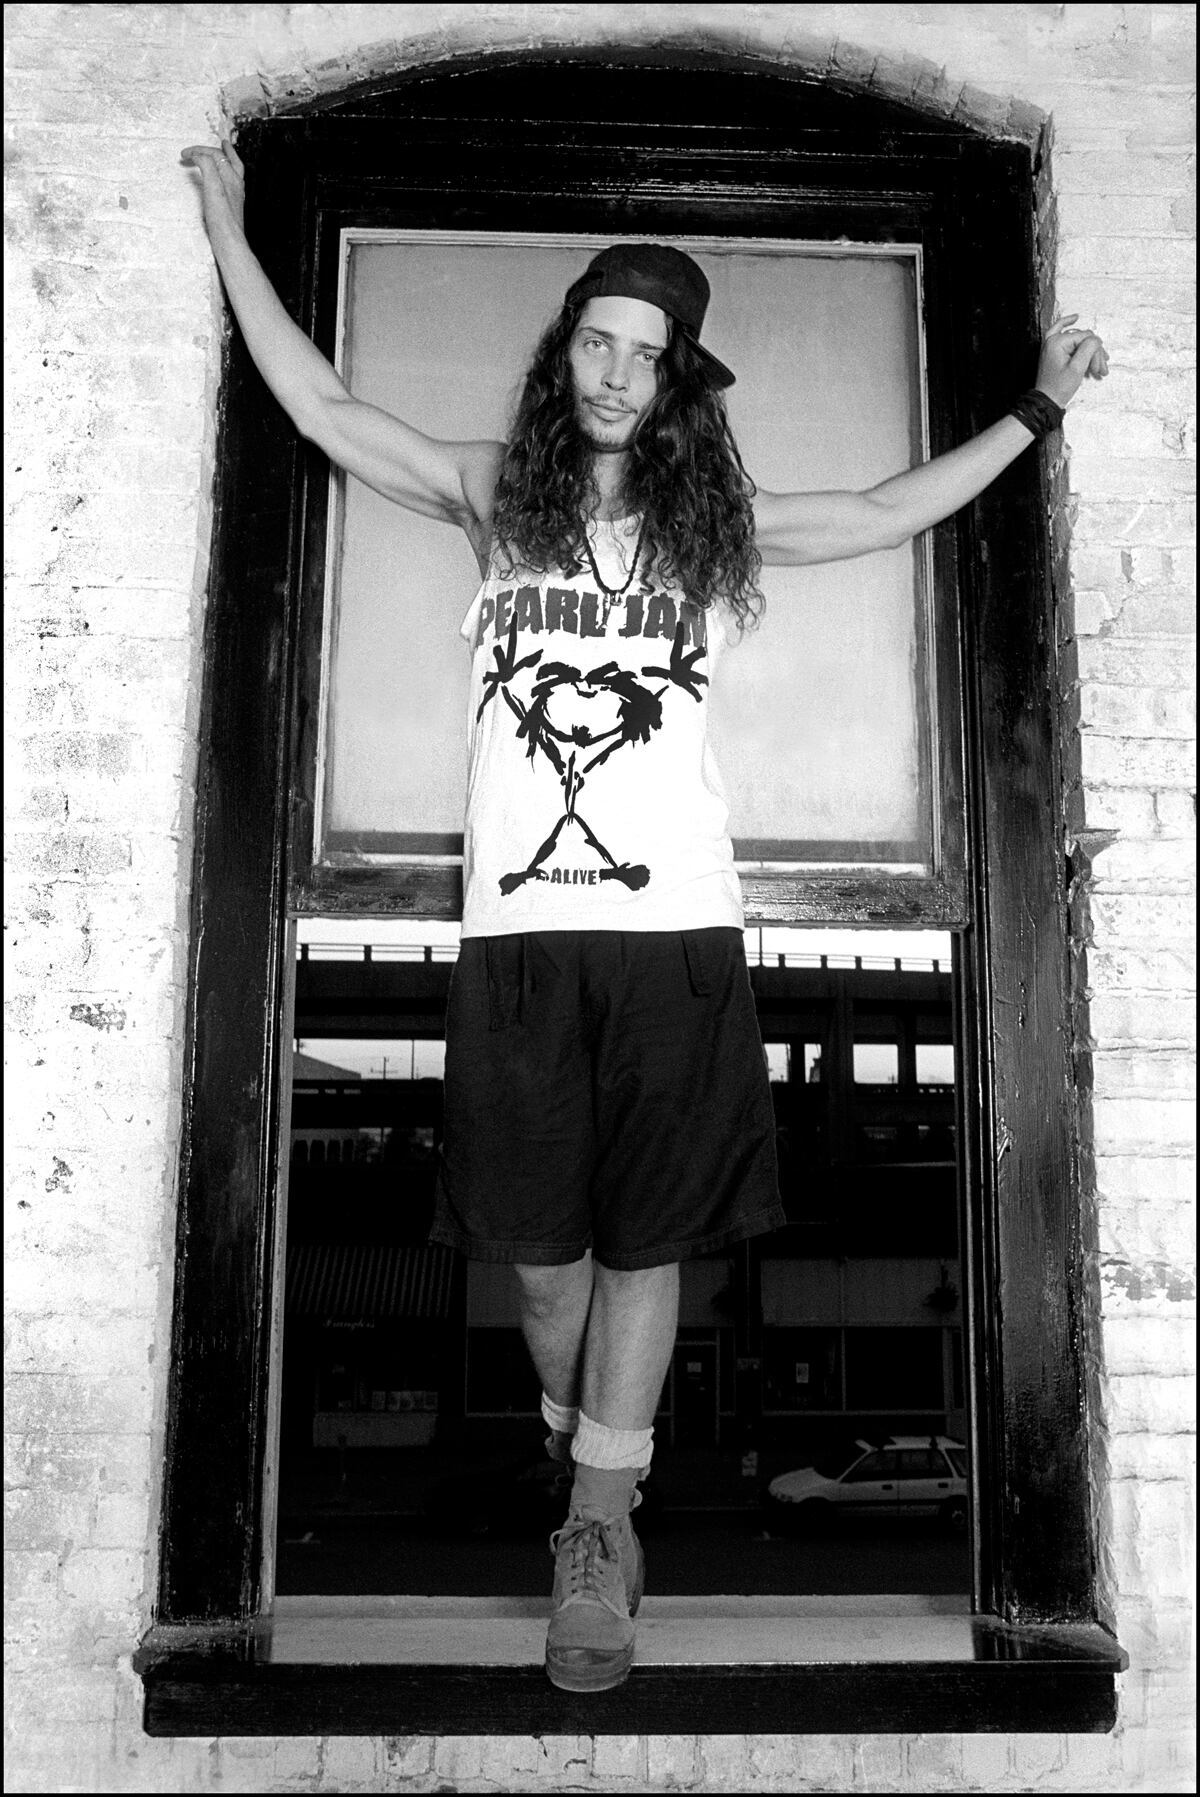 Chris Cornell, clad in a Pearl Jam shirt, stands in the window of photographer Karen Mason...